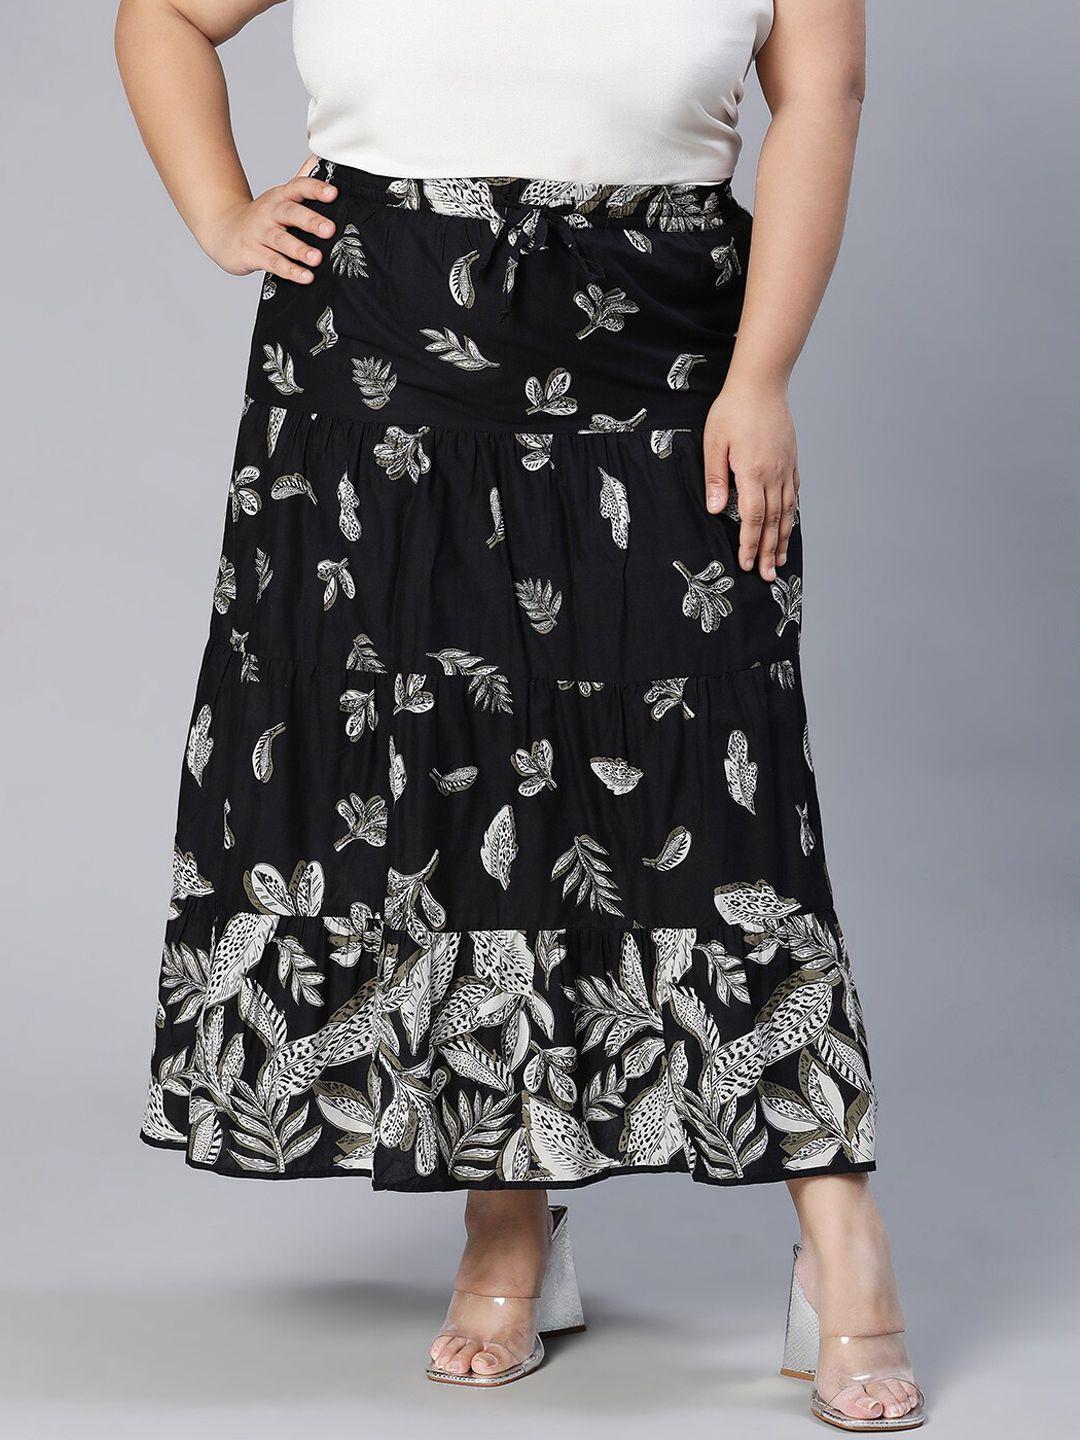 oxolloxo-sublime-printed-plus-size-flared-maxi-skirt